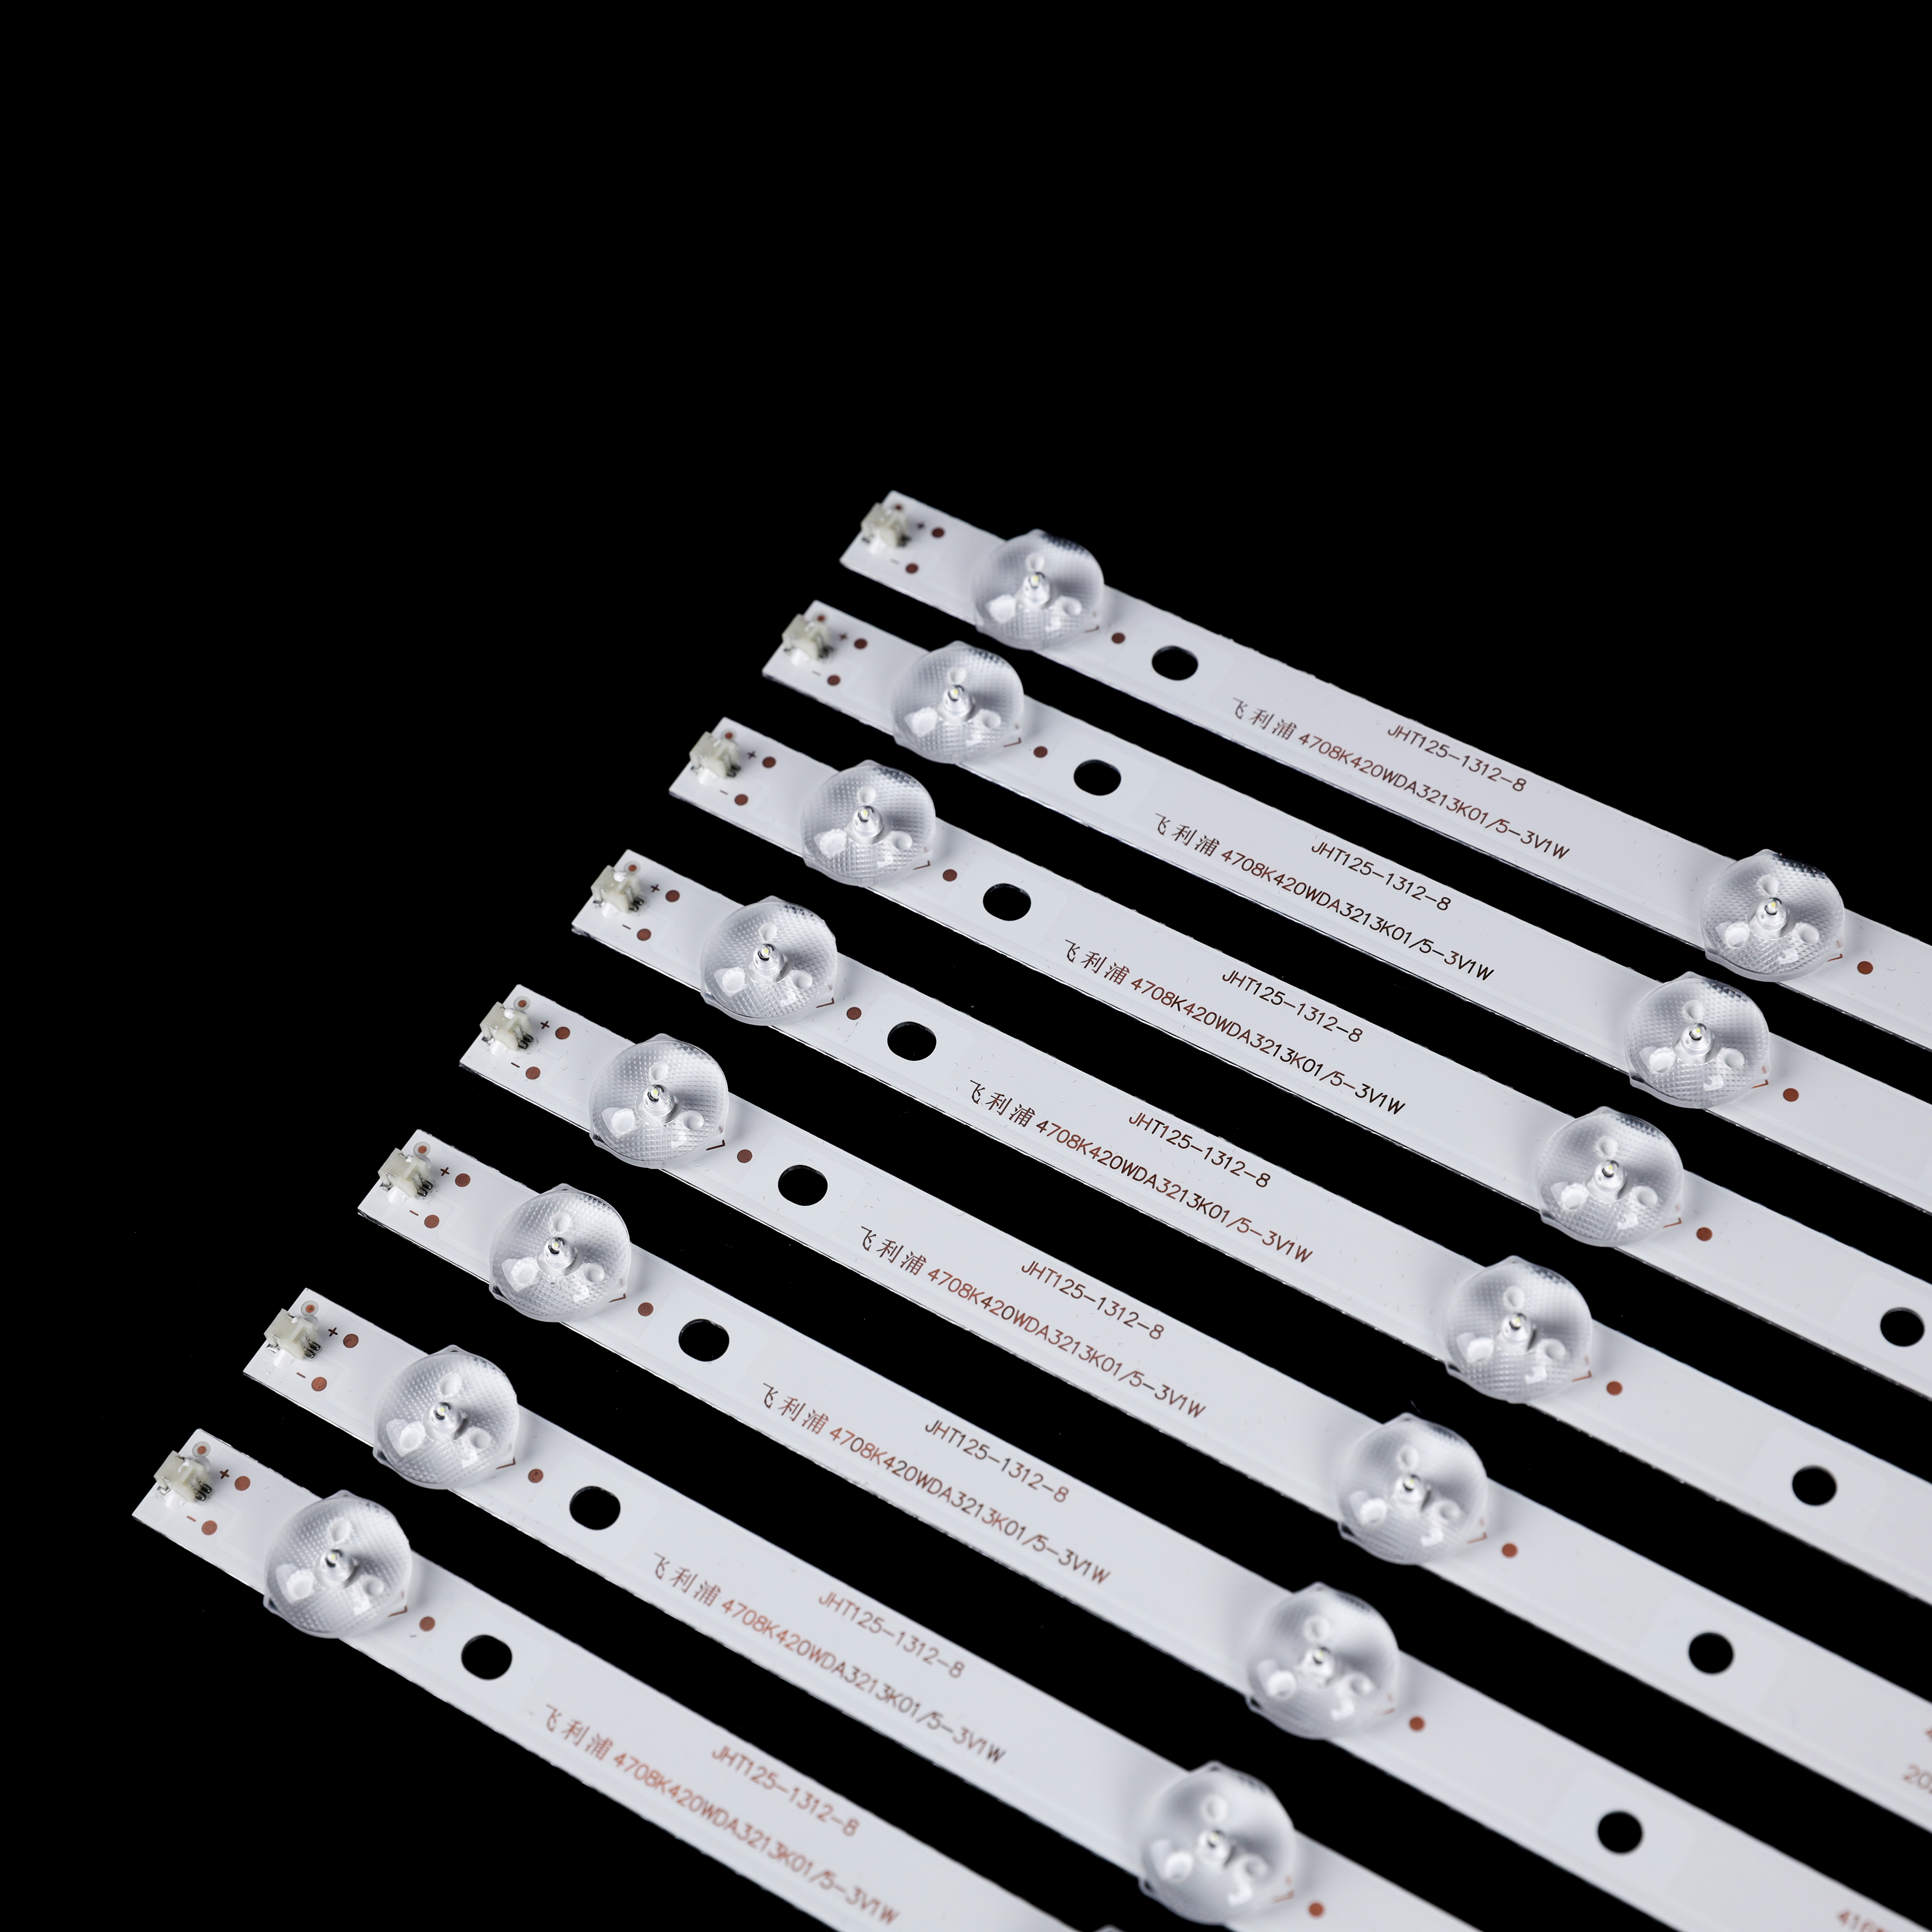 LED TV Backlight strips led bar lighting white color for lcd tv repair high-end quality tv parts 